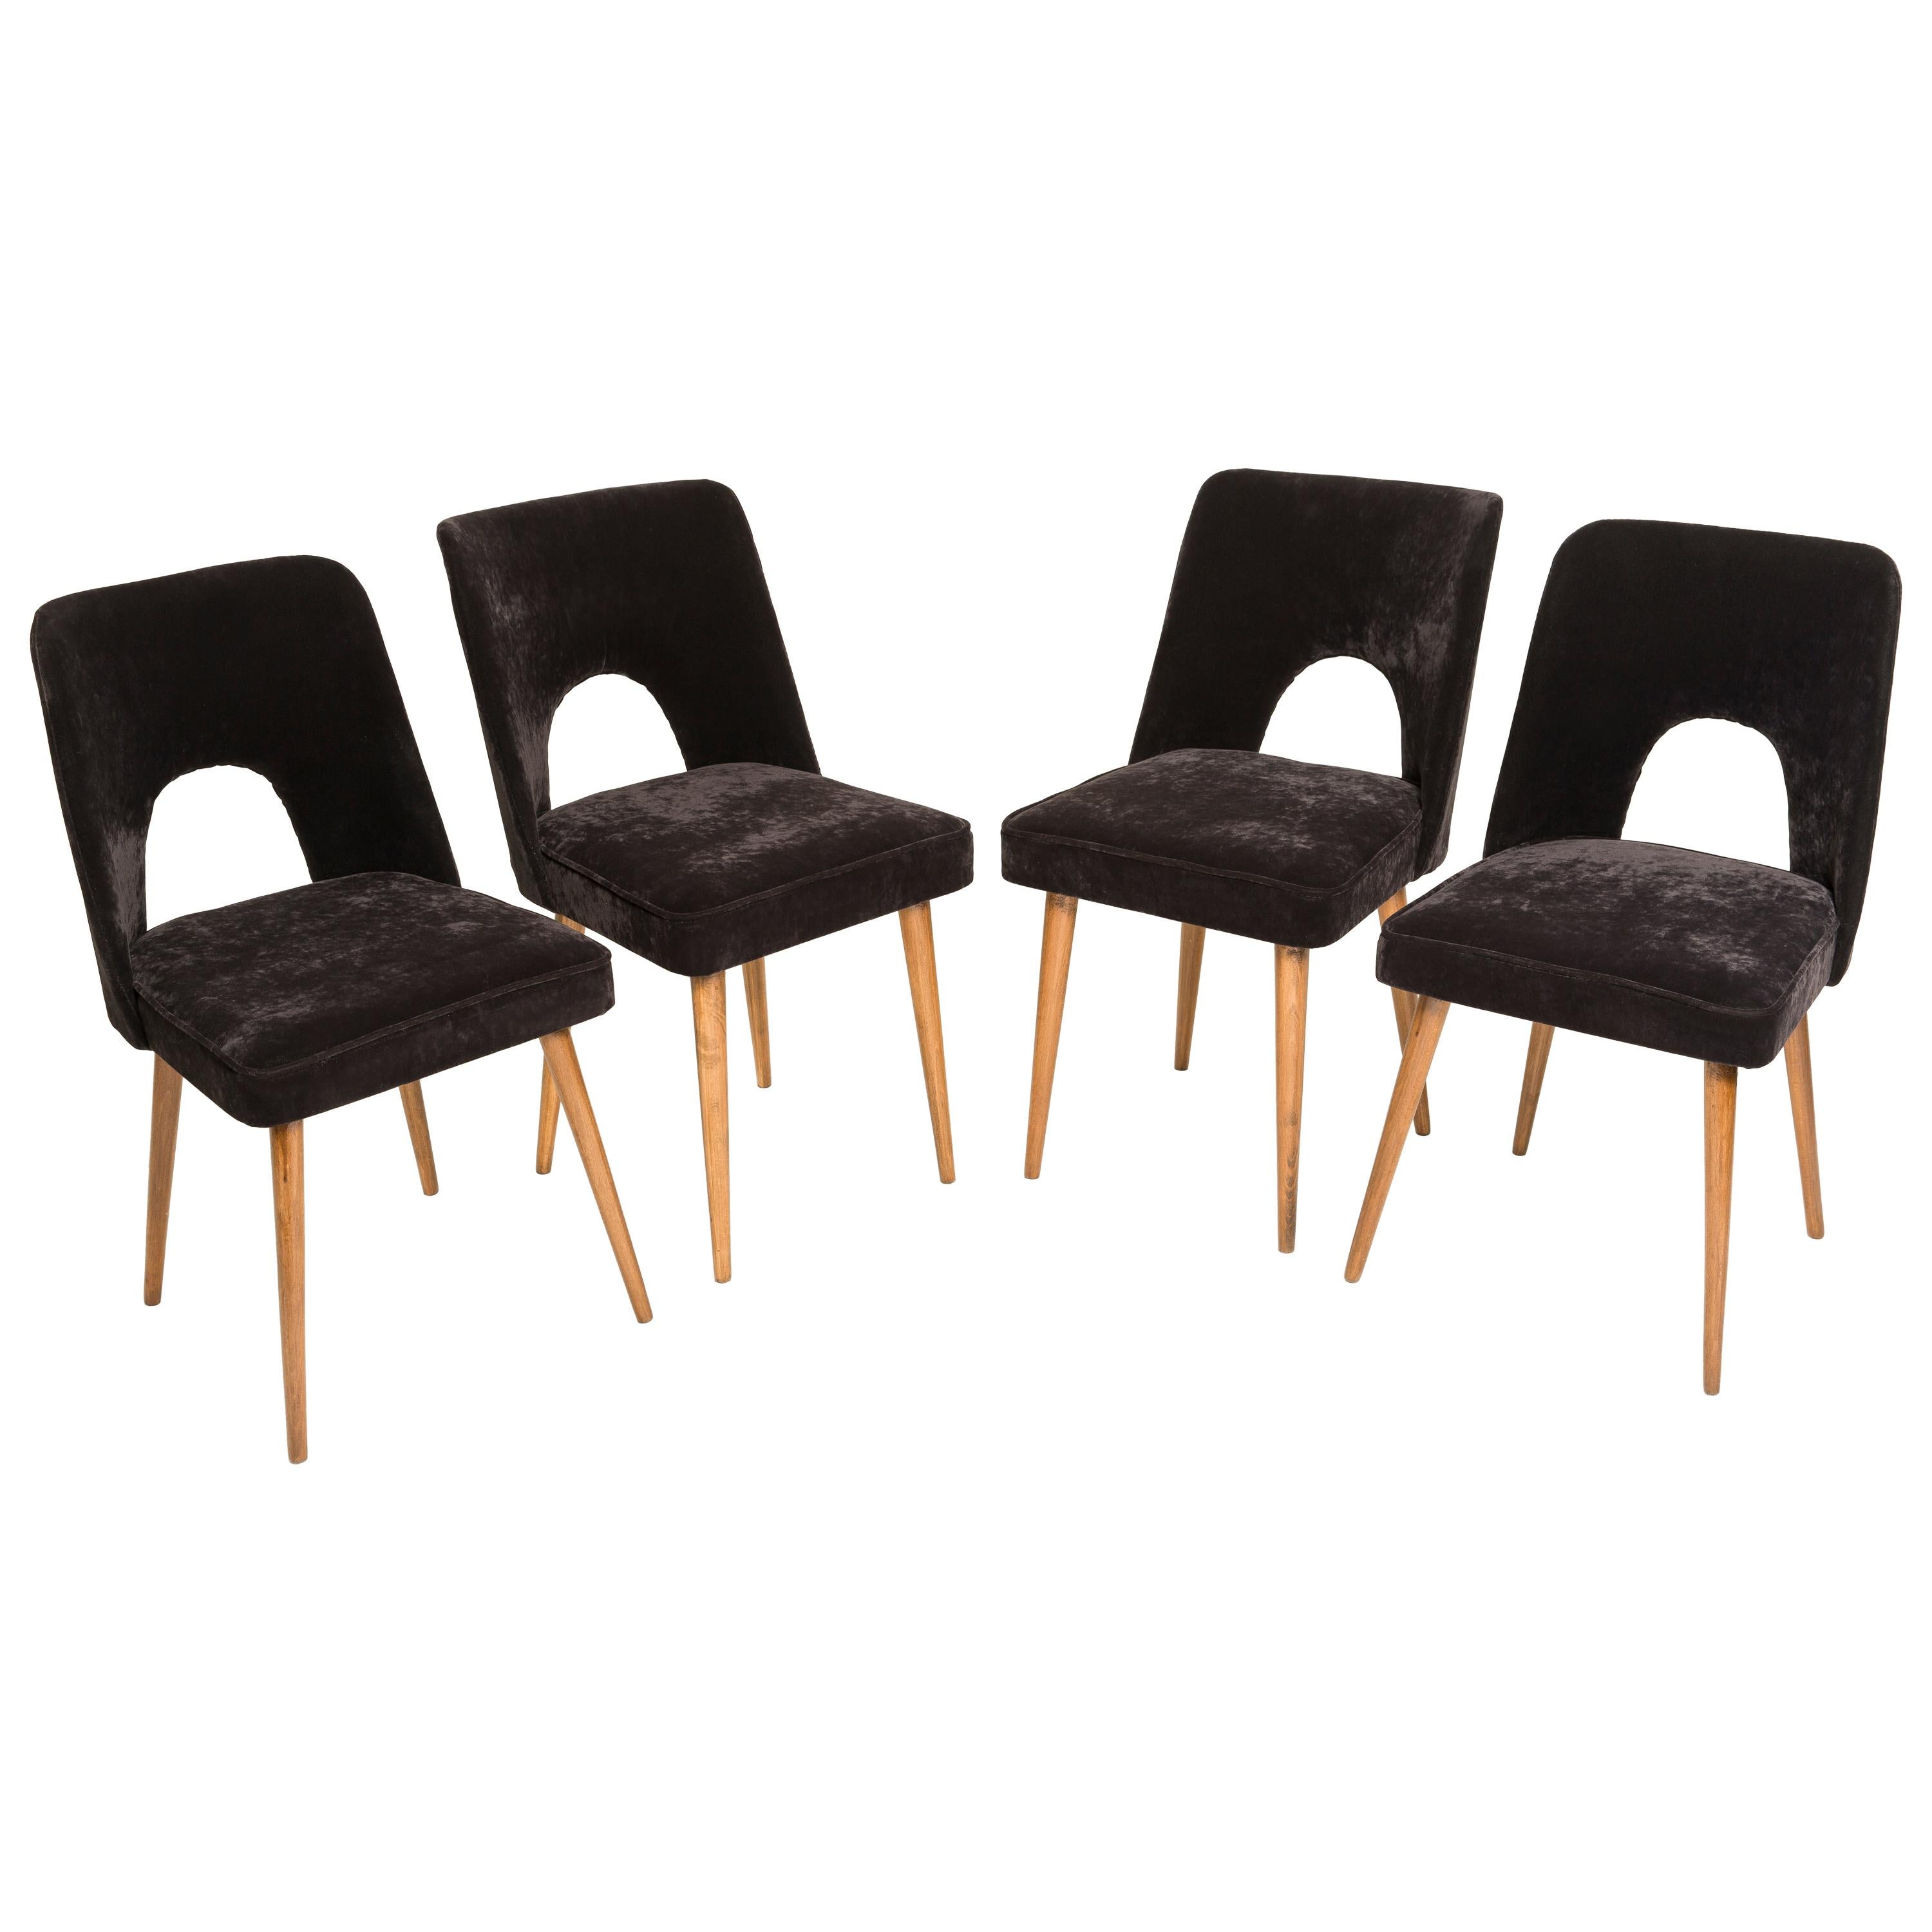 Set of Four Black "Shell" Chairs, Poland, 1960s